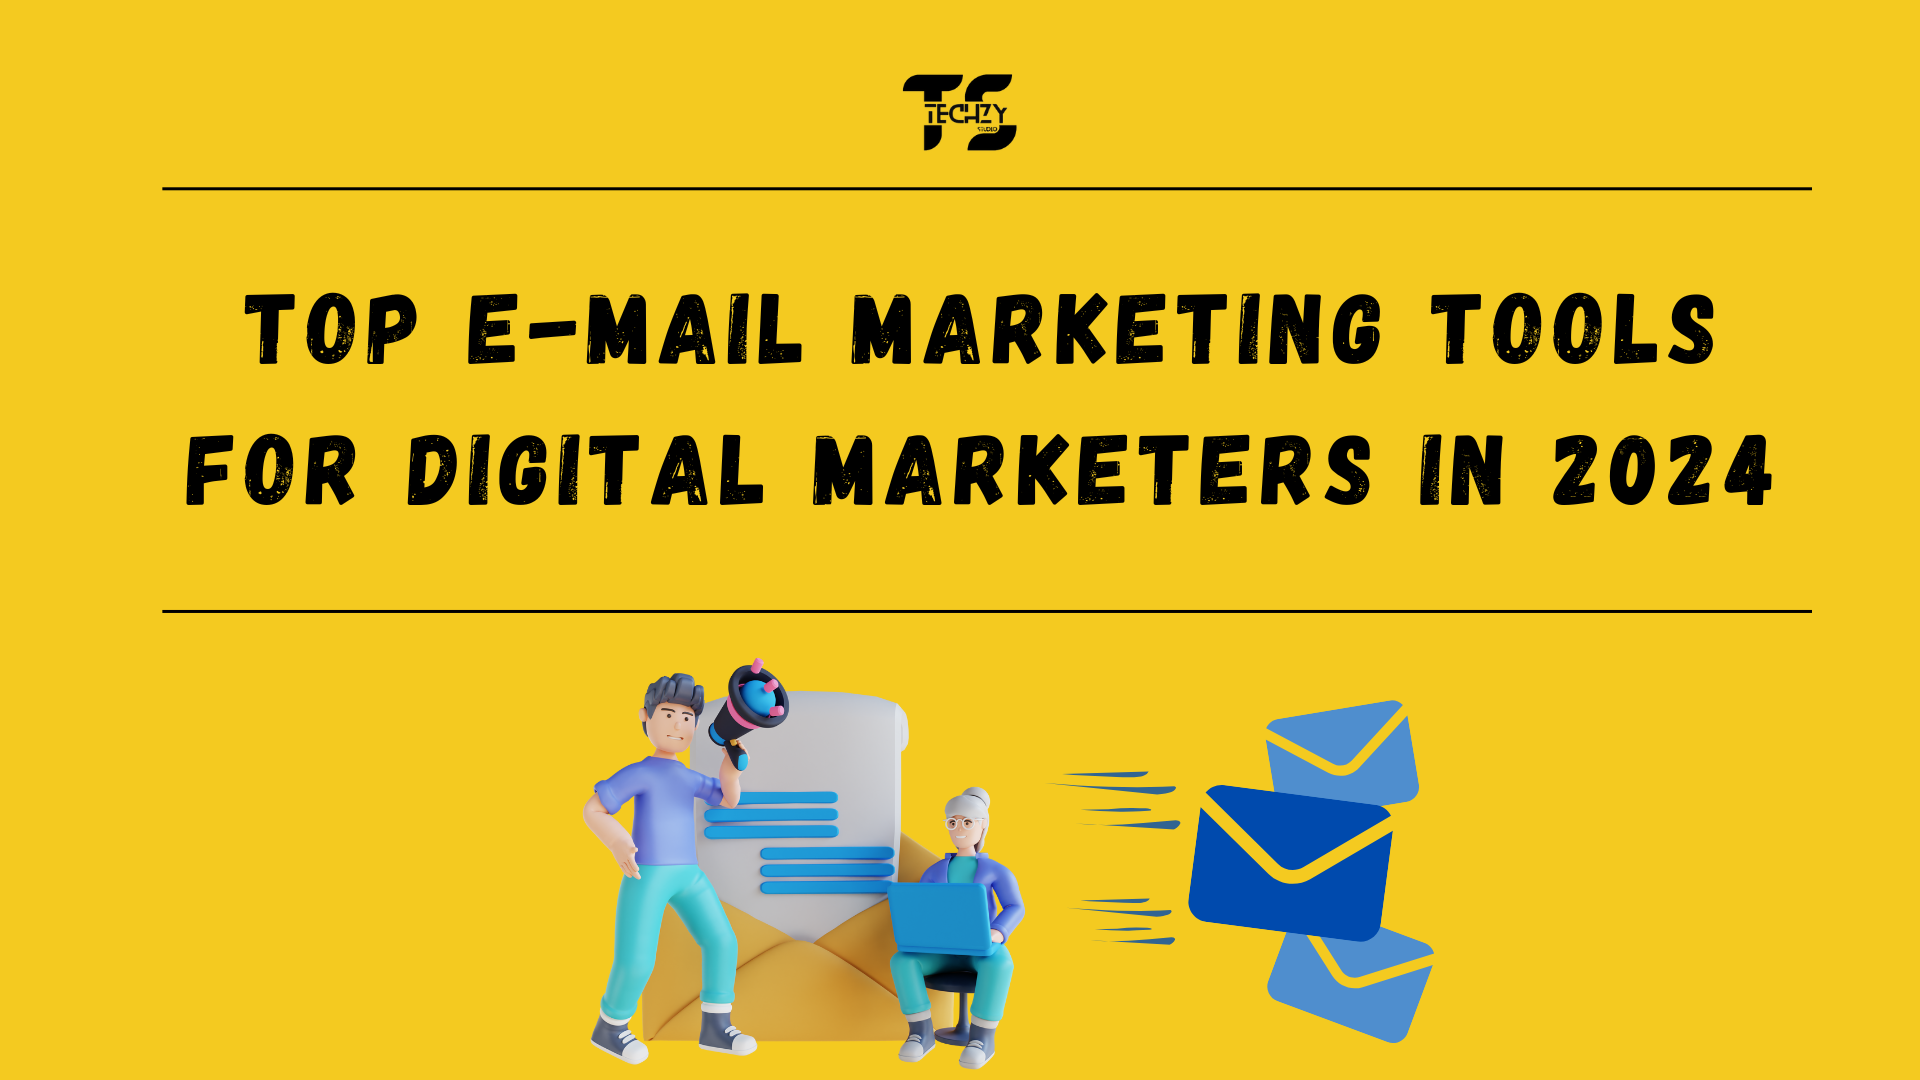 TOP E-MAIL MARKETING TOOLS FOR DIGITAL MARKETERS IN 2024